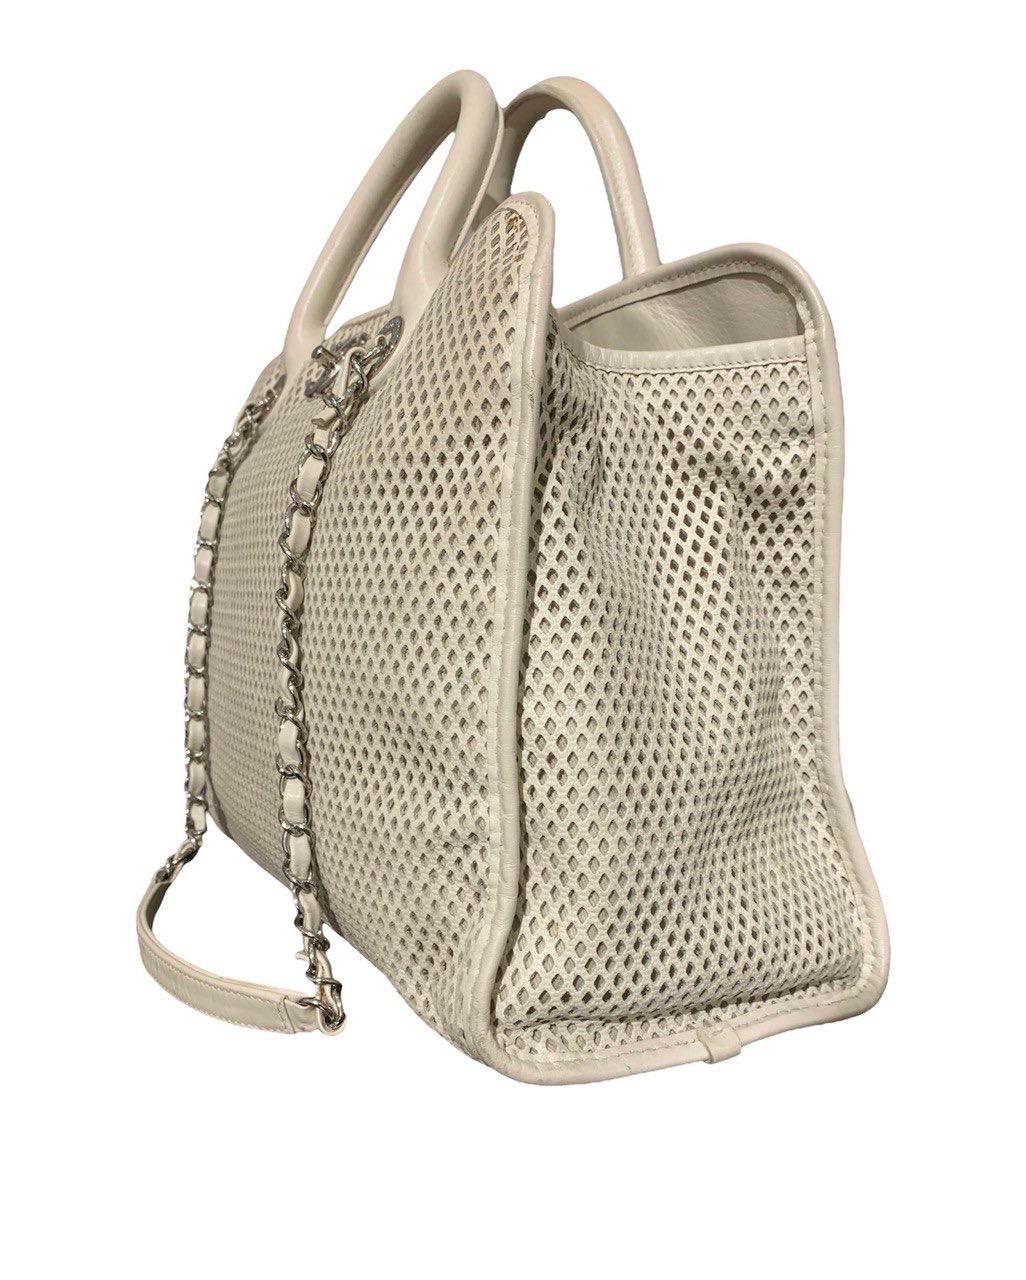 

Chanel signed bag, made of white perforated leather with silver hardware. Equipped with a double rigid leather handle and two braided leather and chain handles to wear the bag on the shoulder. Internally lined in beige canvas, it has various